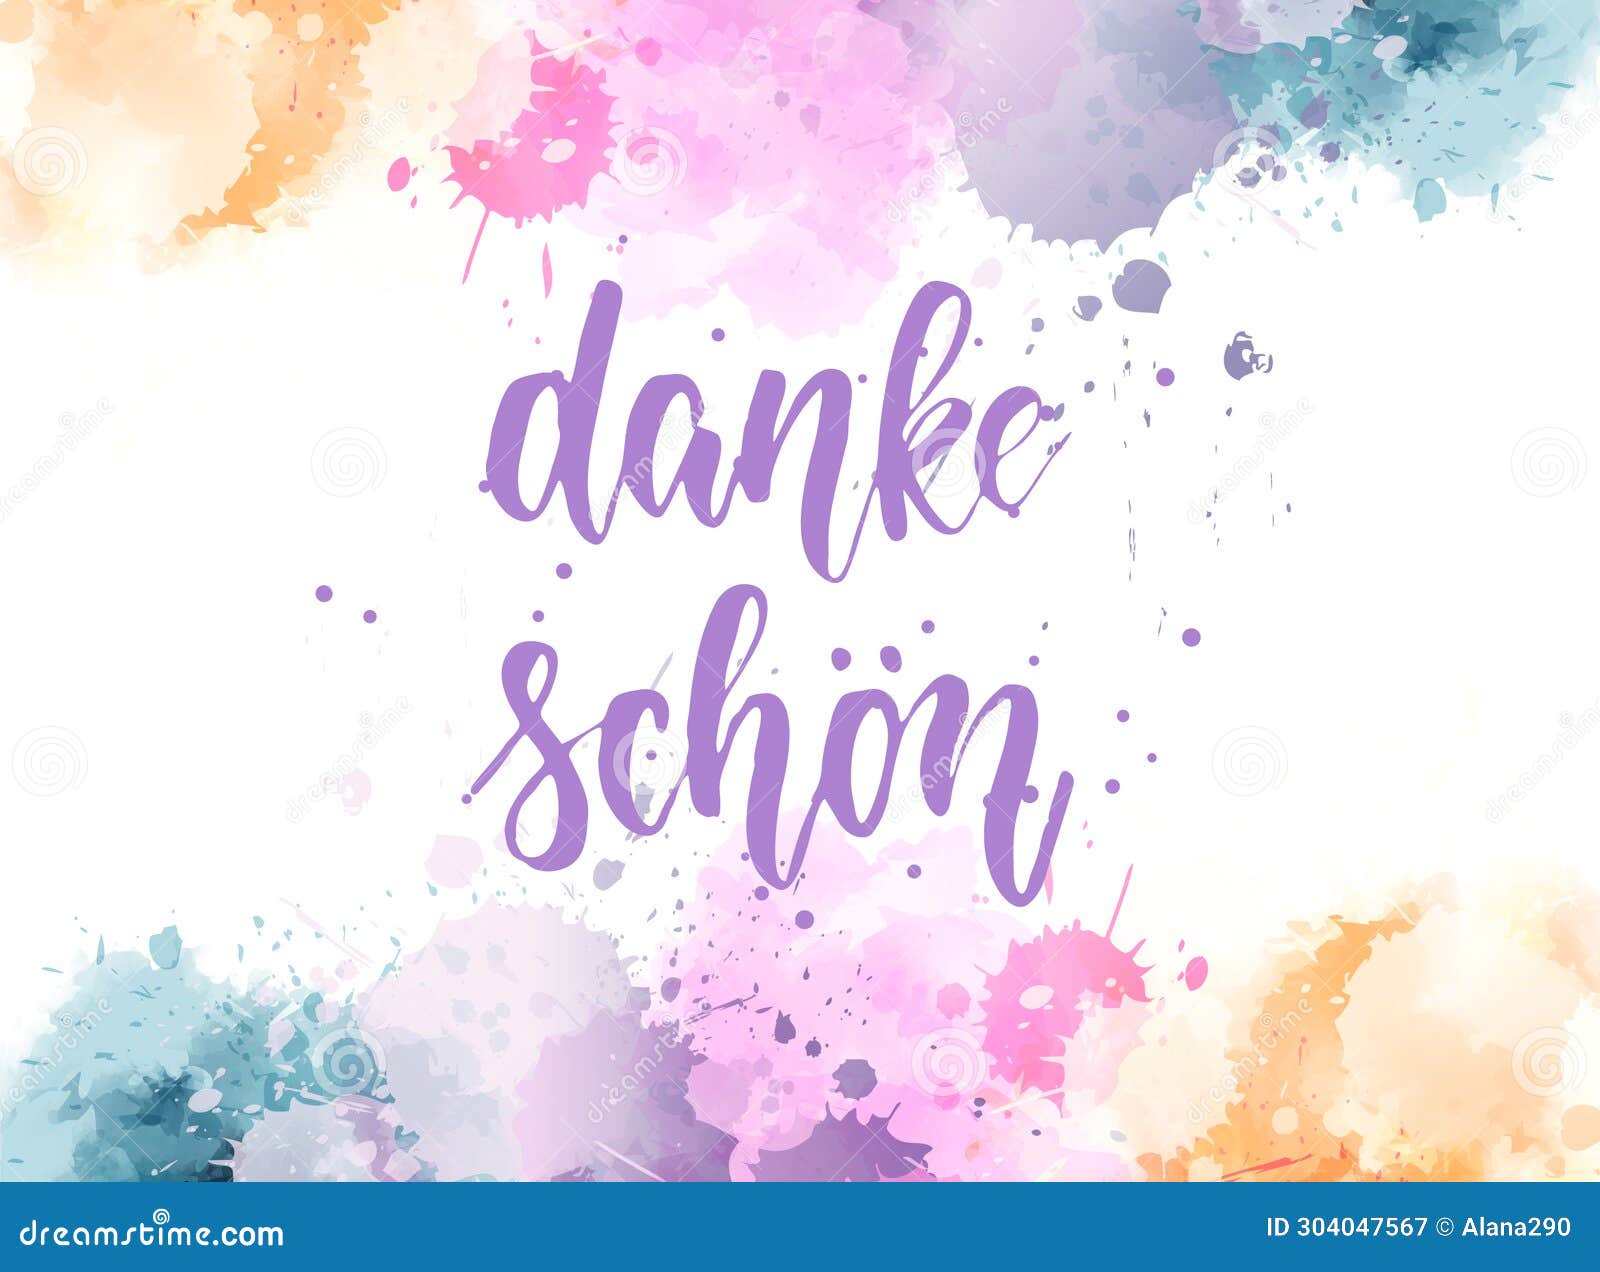 danke schon - thank you in german. handwritten modern calligraphy watercolor lettering text. colorful handlettering on watercolor